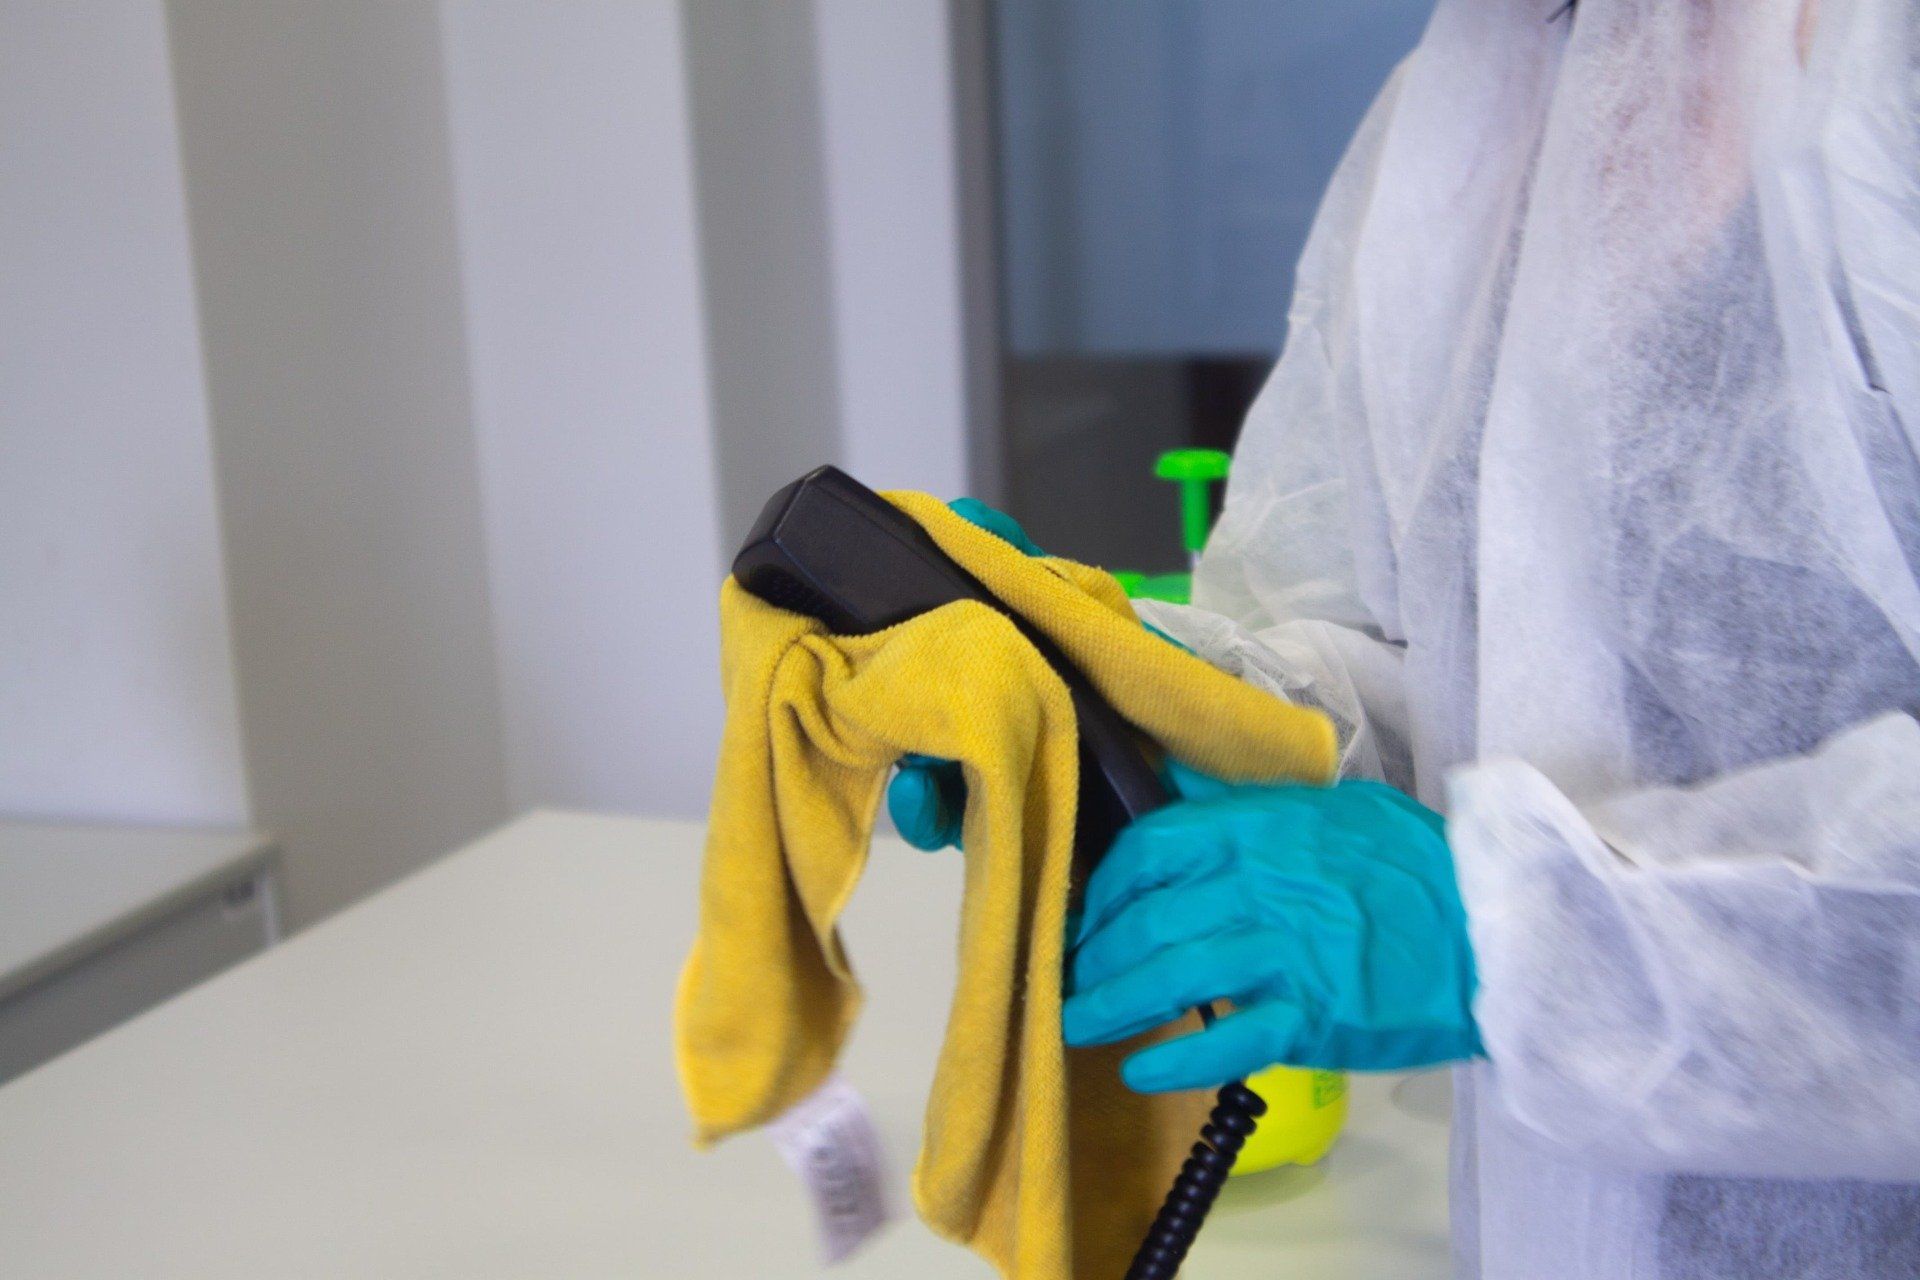 Benefits of Disinfecting Services